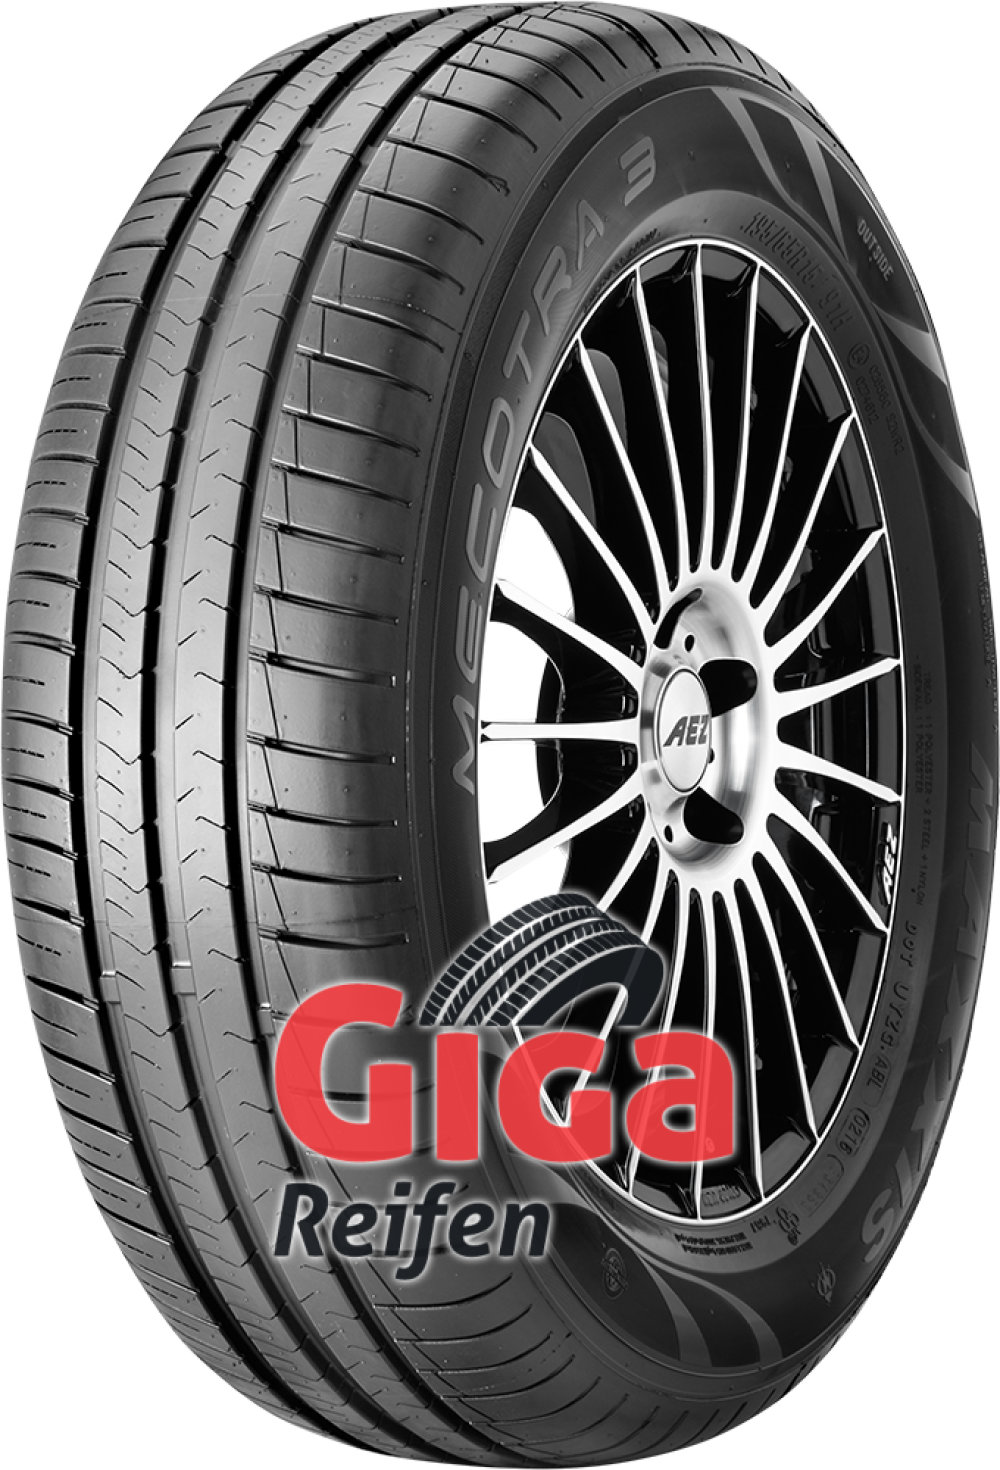 Maxxis Mecotra 3 ( 155/60 R15 74T ) von Maxxis